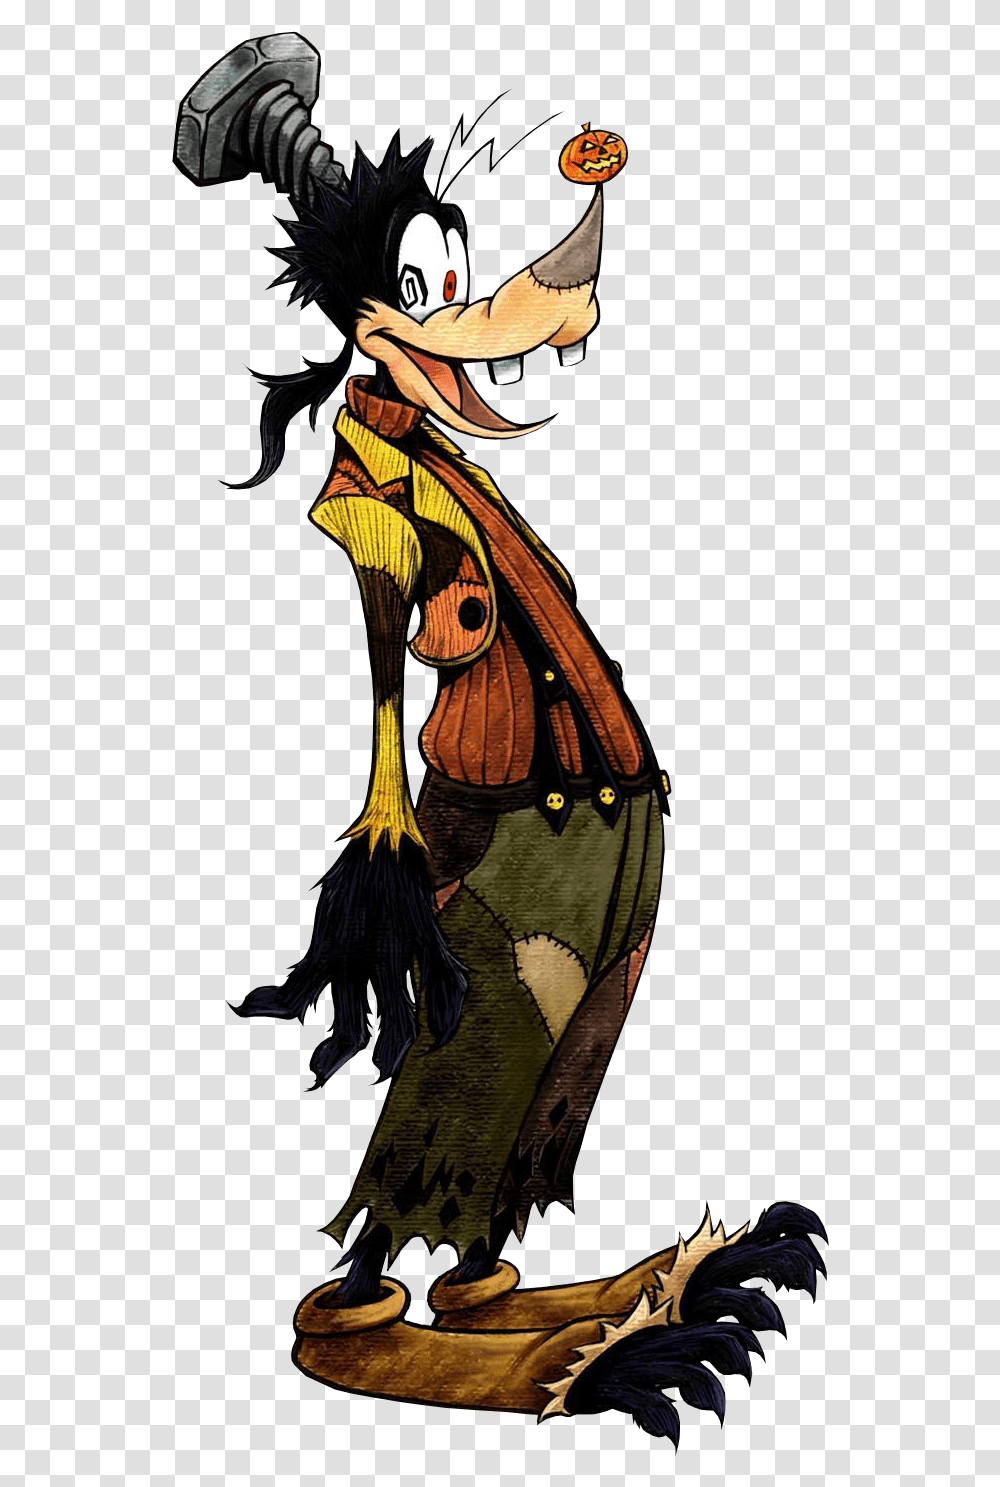 Goofy Images Kingdom Hearts Halloween Town Costume, Performer, Person, Leisure Activities, Dance Pose Transparent Png